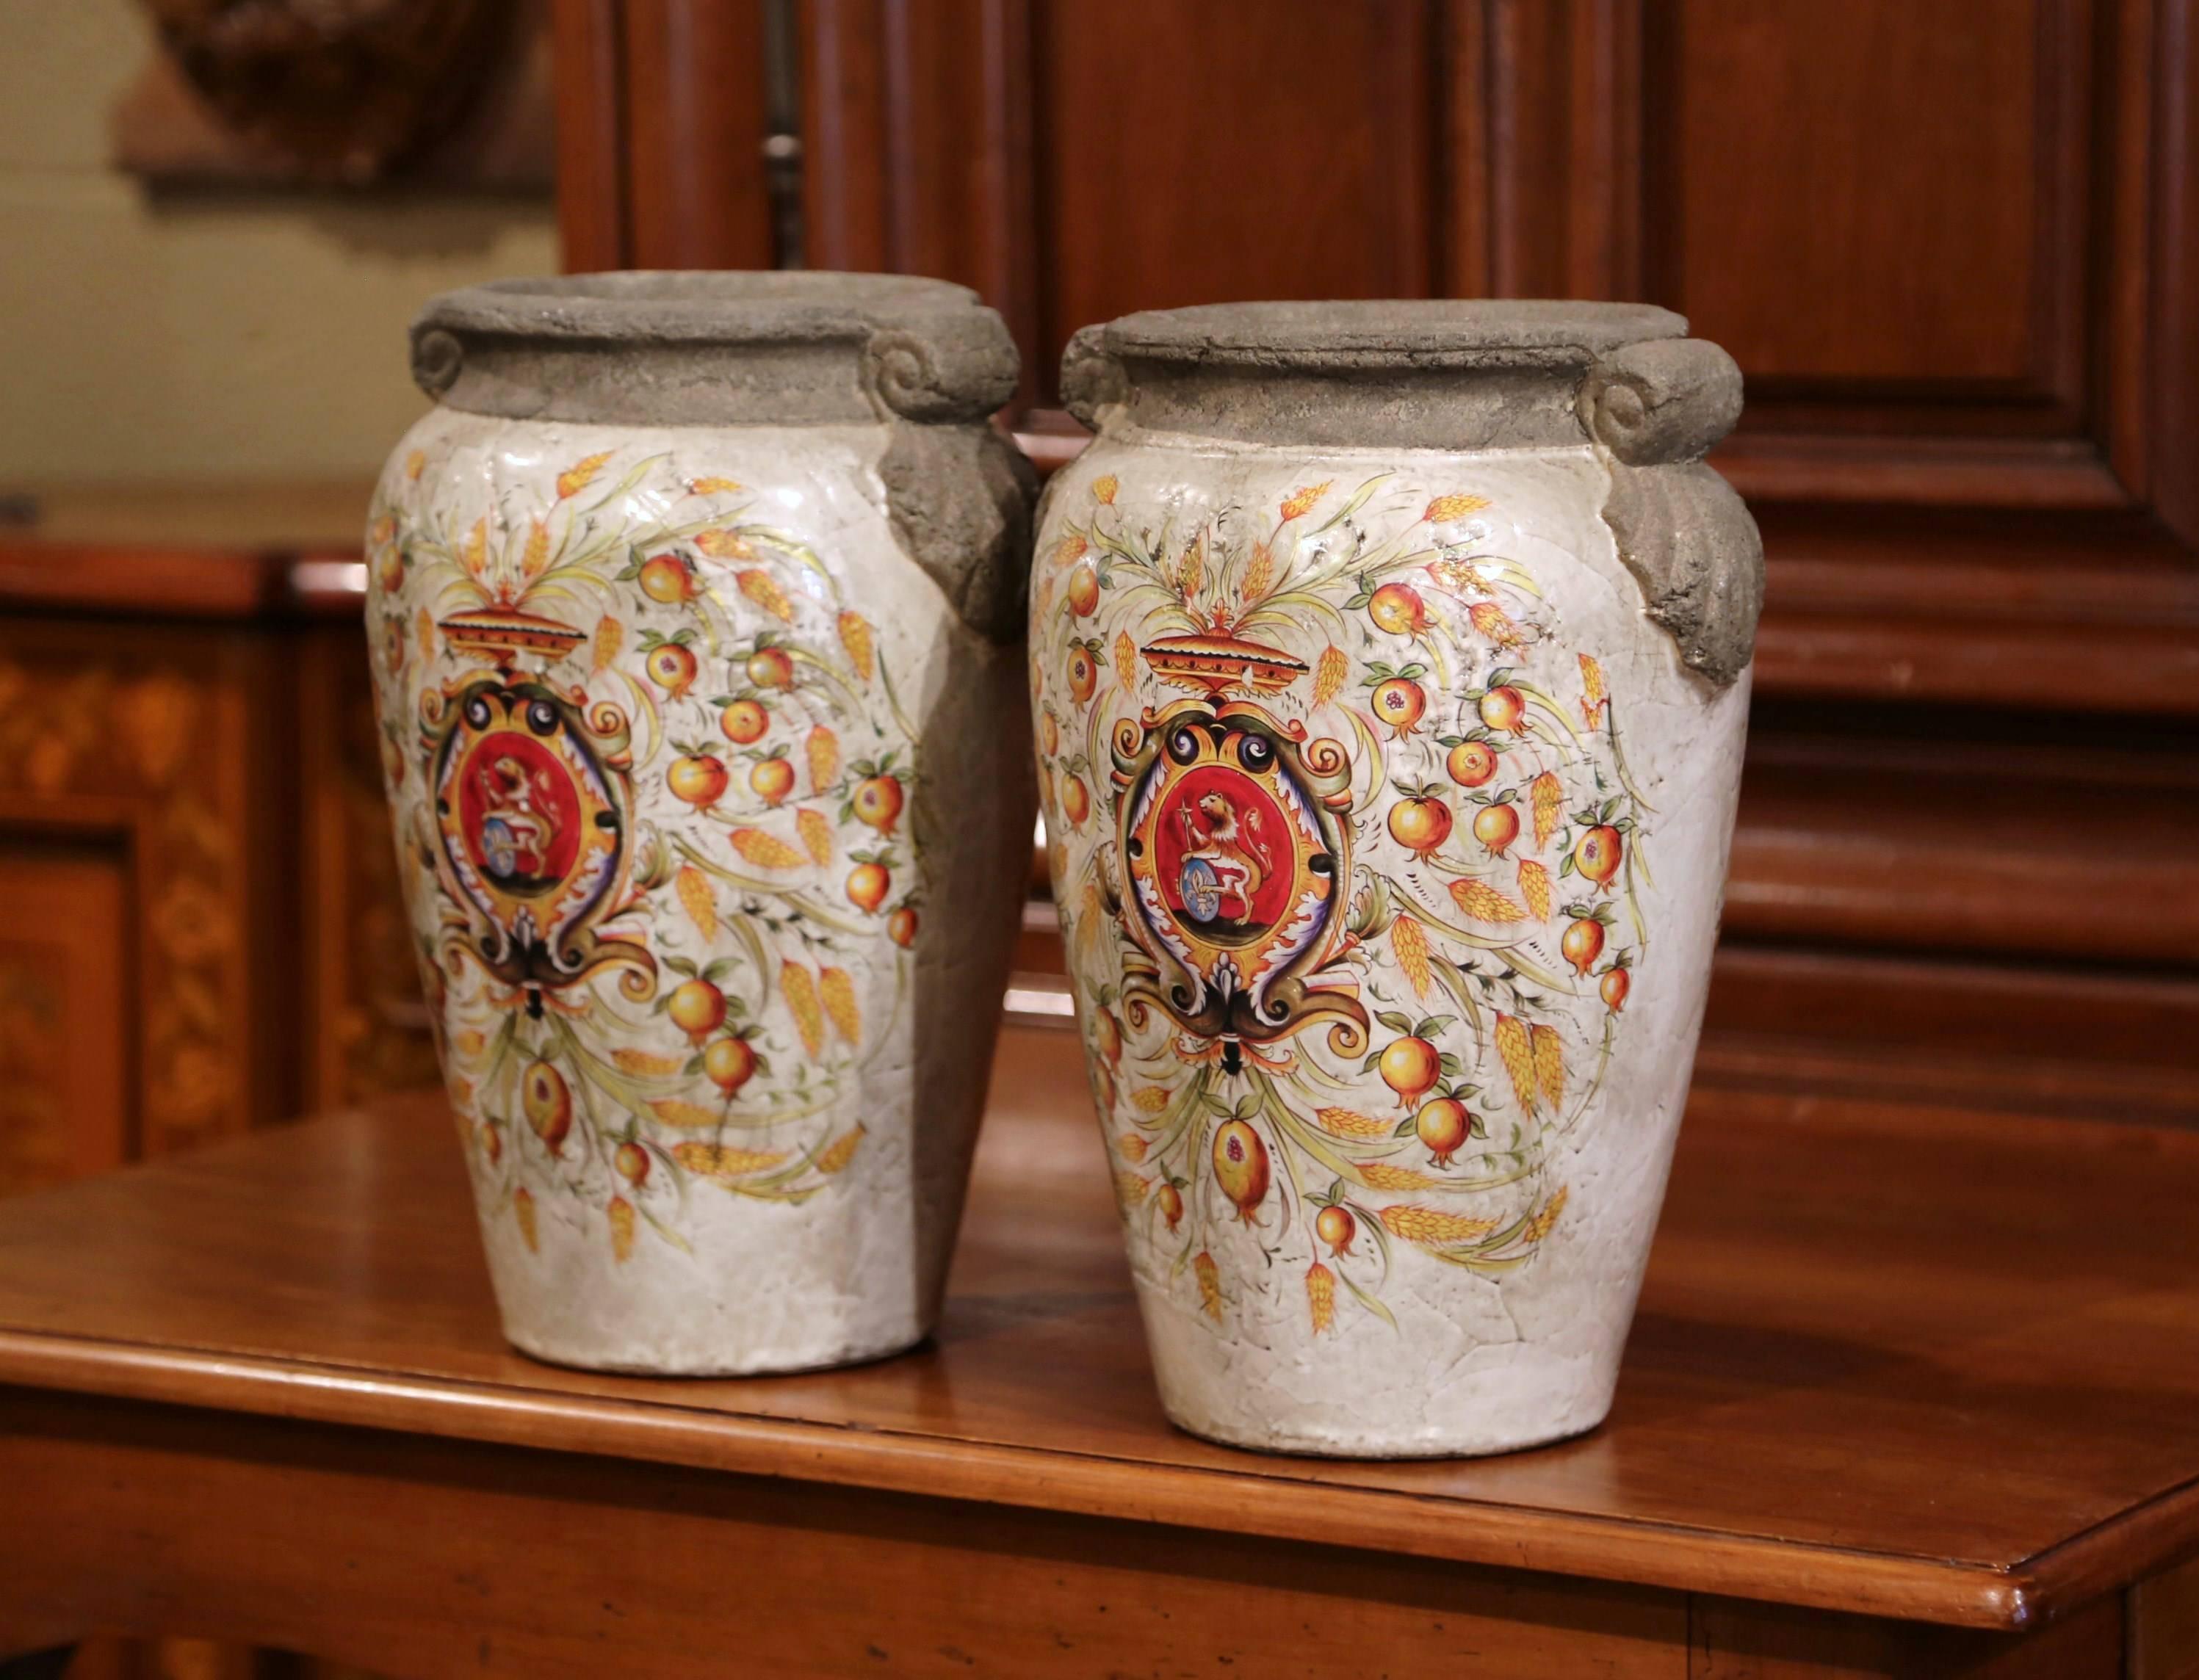 Decorate your home with this pair of colorful vases from Italy. The large, decorative vases are round in shape with small handles on either side. The ceramic vases feature hand-painted decor on both sides with a crest, wheat and fruit. The centre